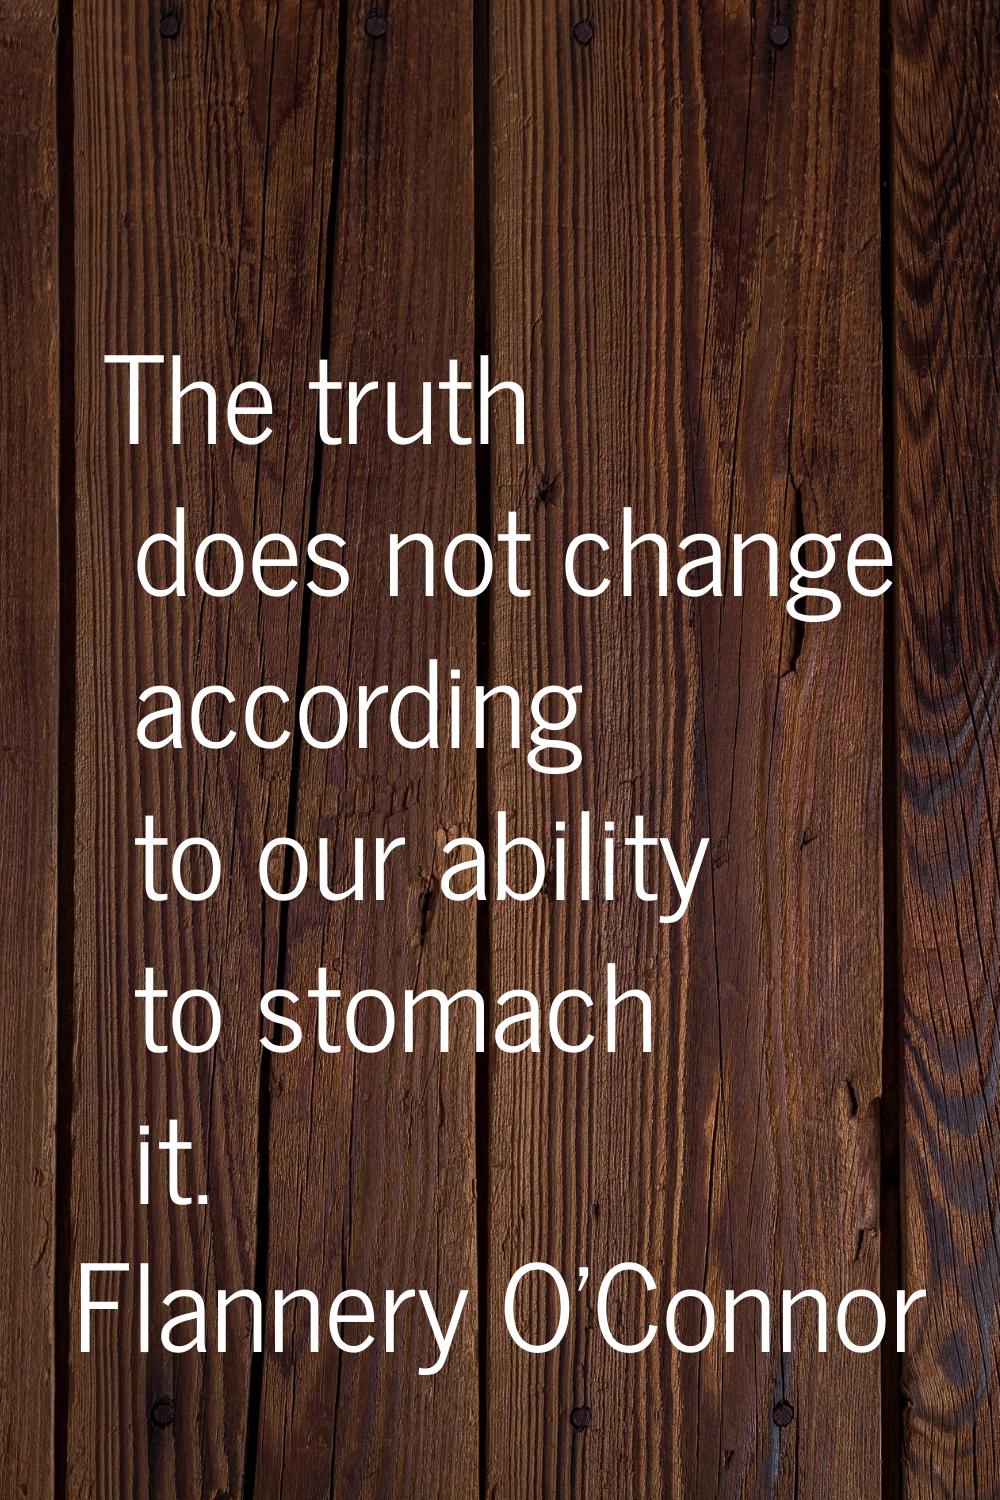 The truth does not change according to our ability to stomach it.